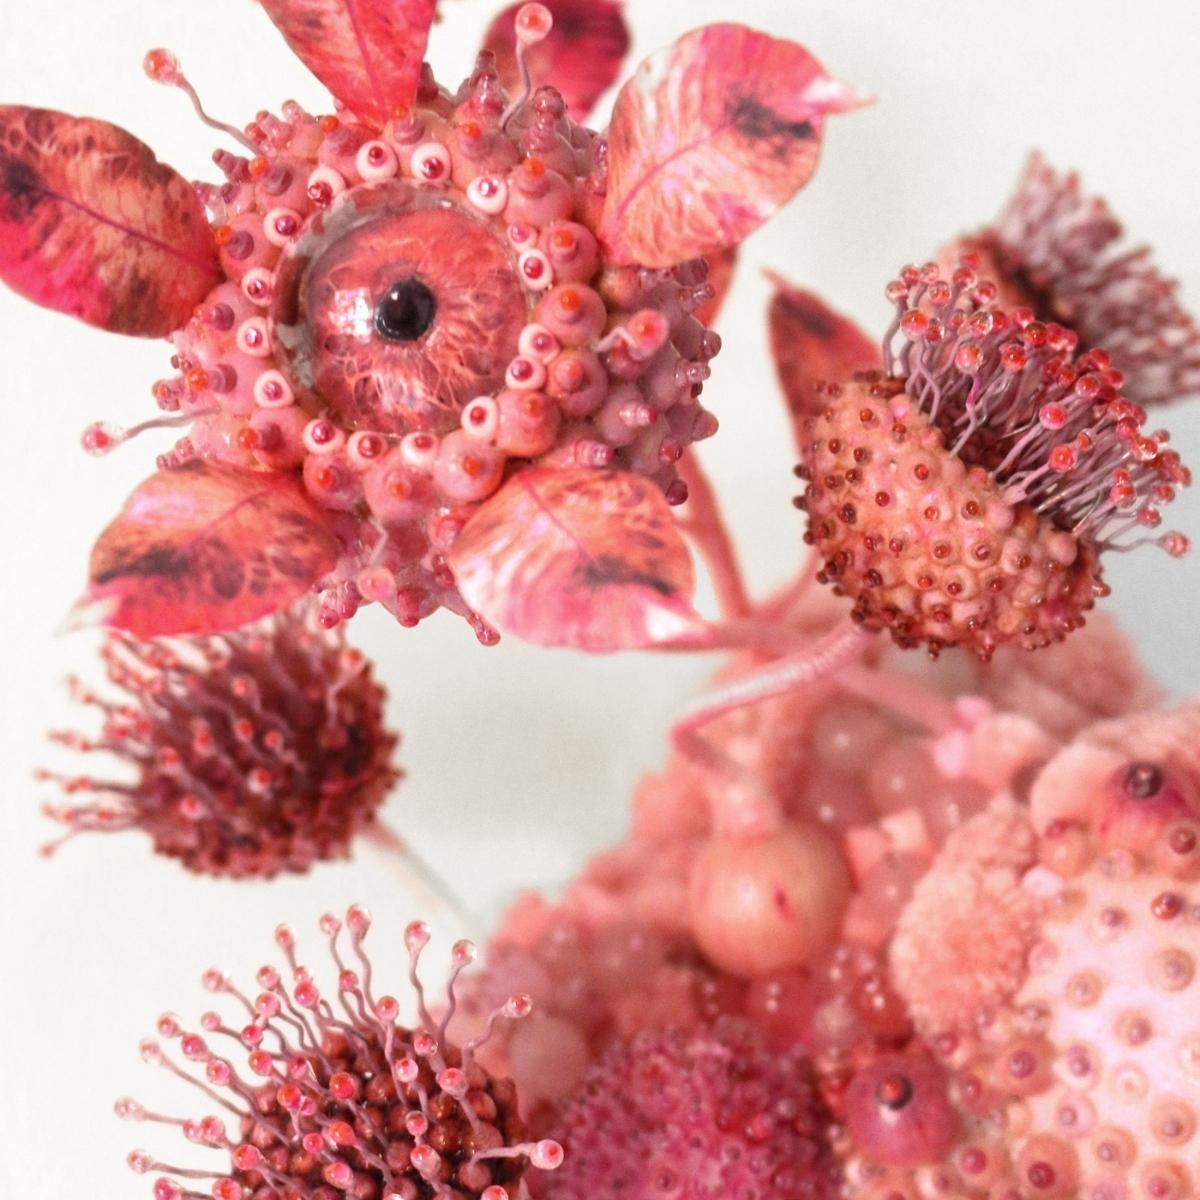 amy-gross-creates-hand-crafted-sculptures-of-the-natural-world-featured